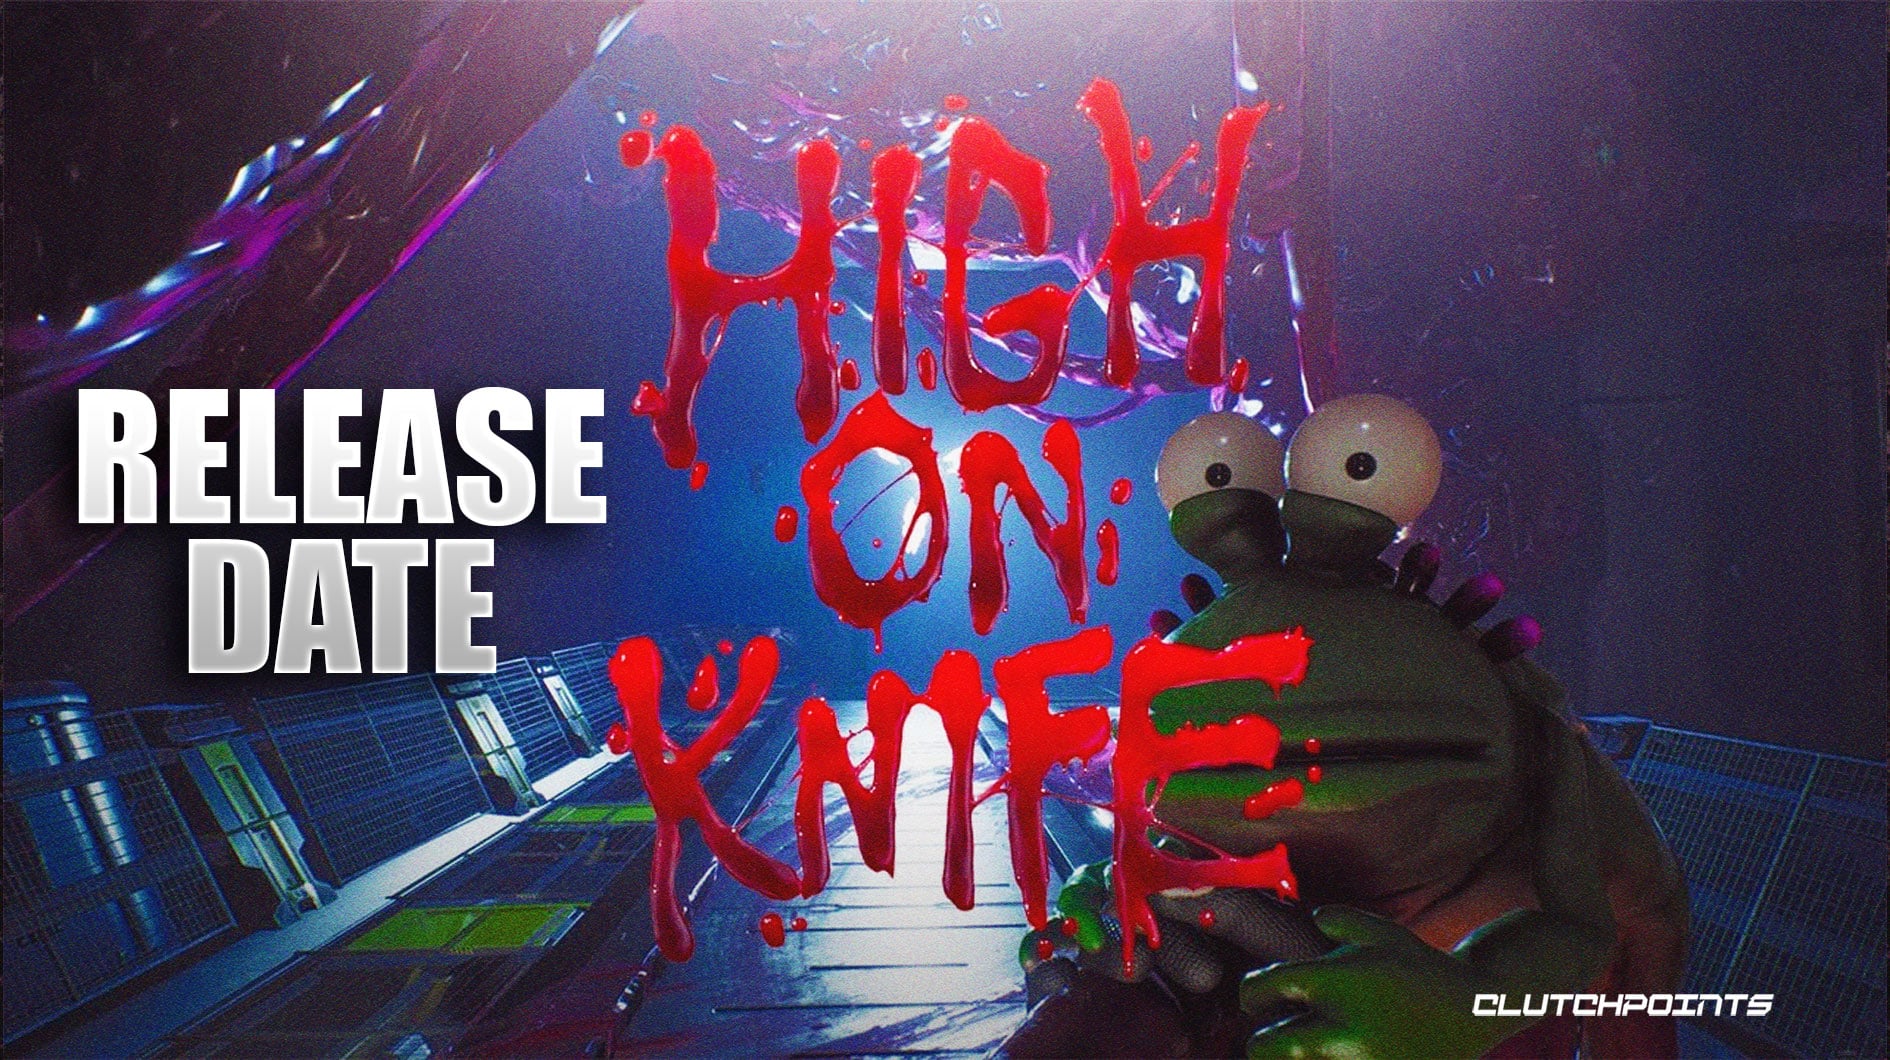 High On Life: High On Knife DLC Gets a Release Date